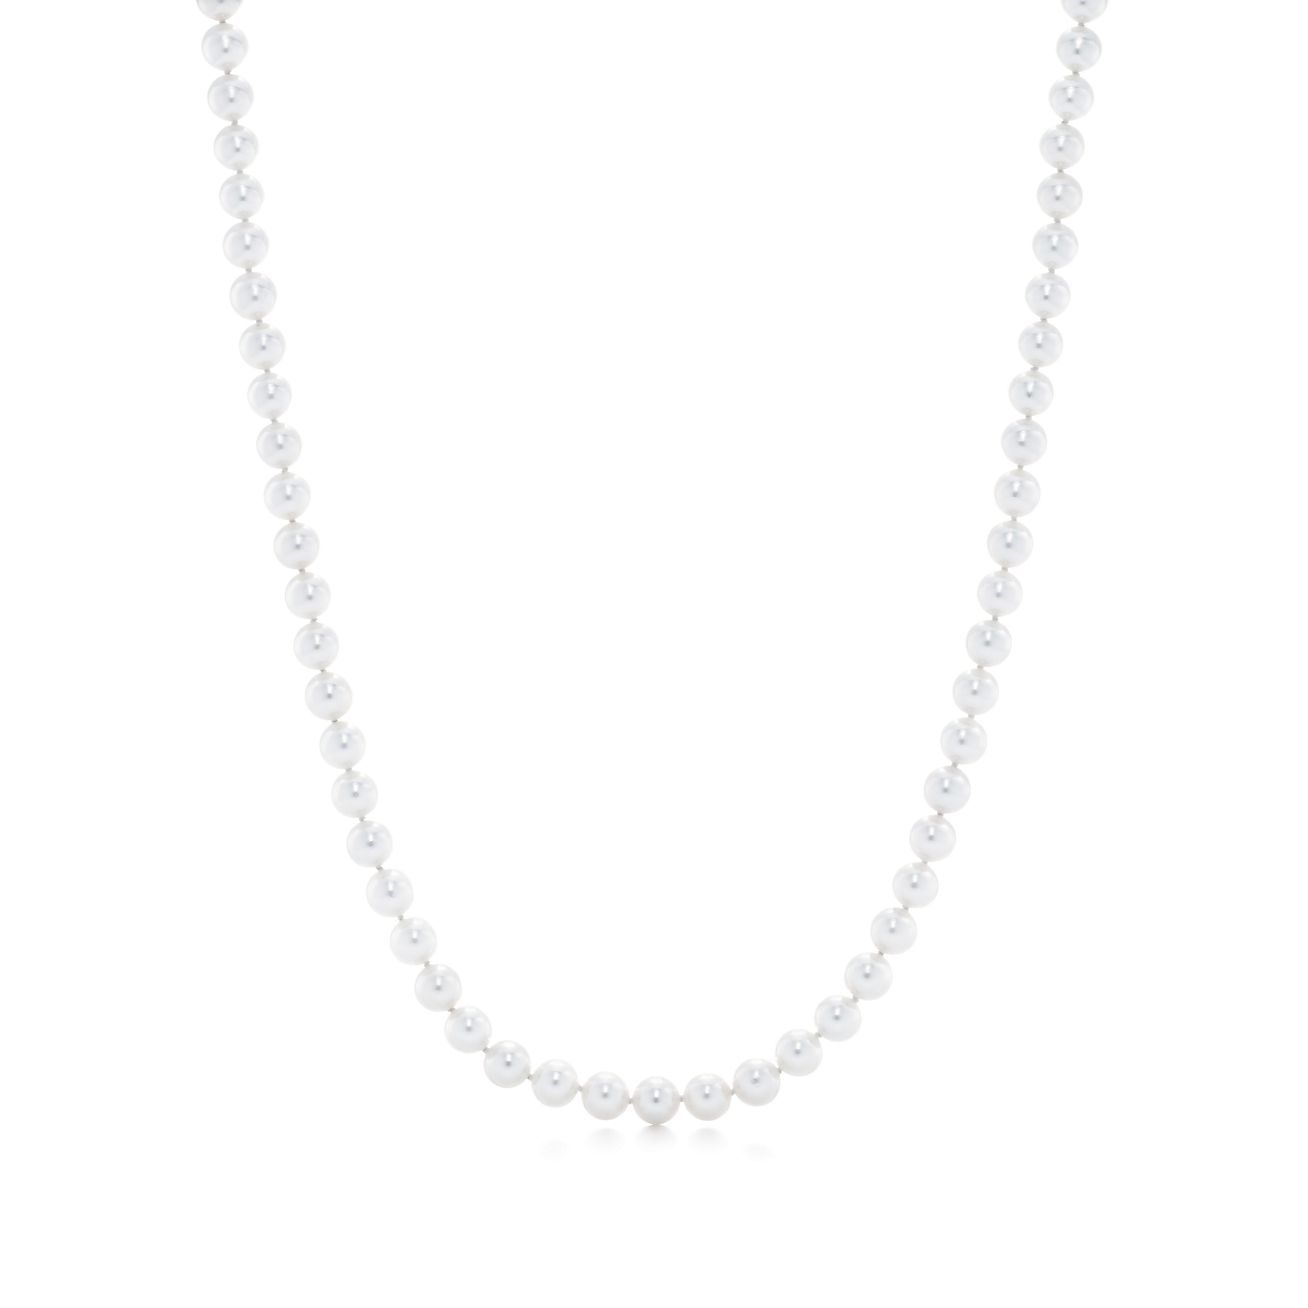 Tiffany Essential Pearls necklace of 